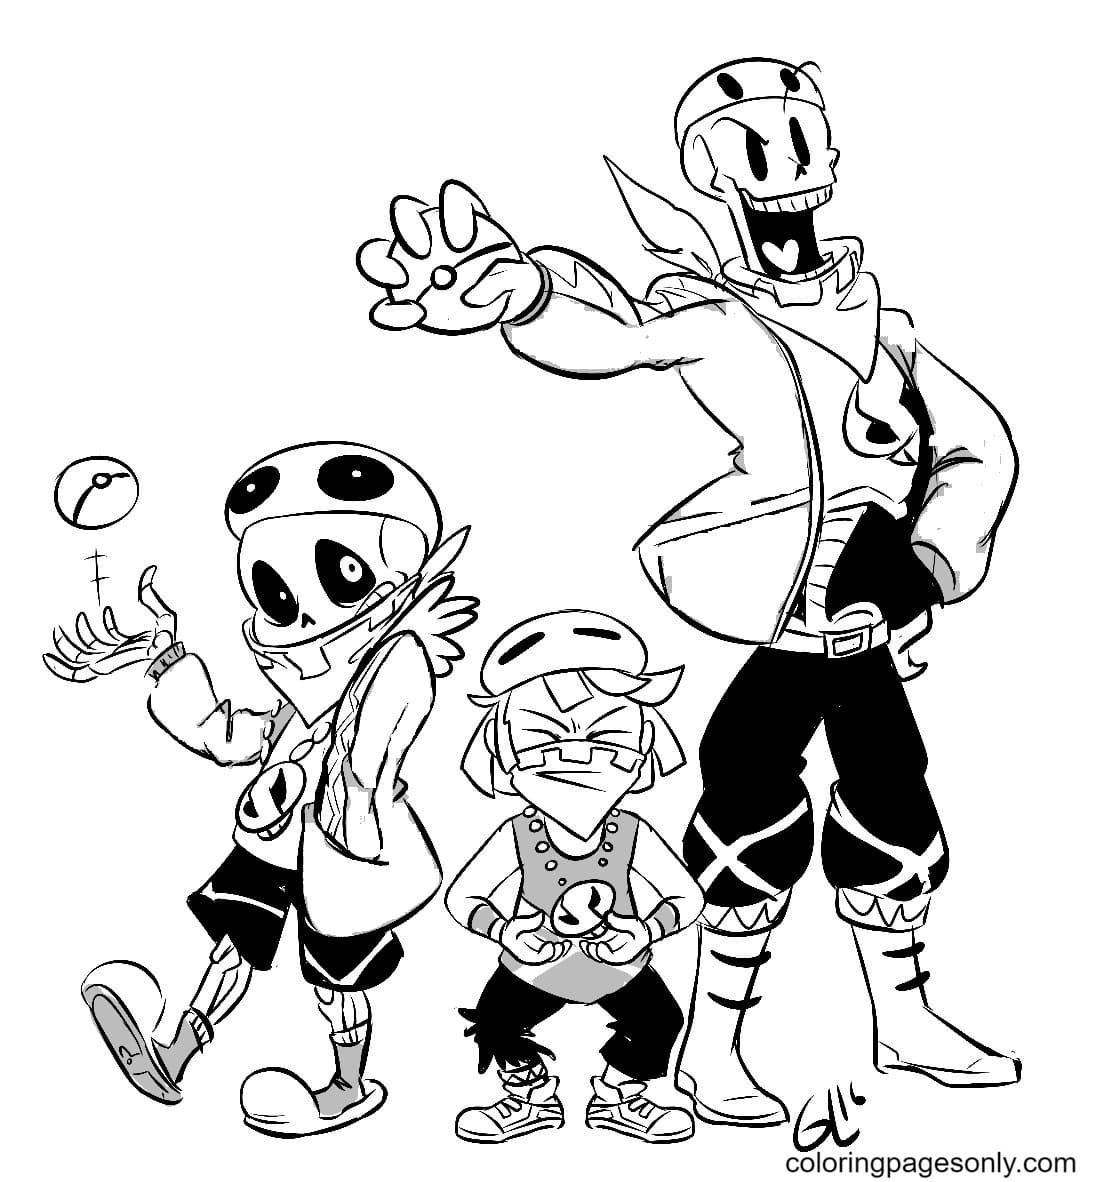 The original Team Skull Coloring Page